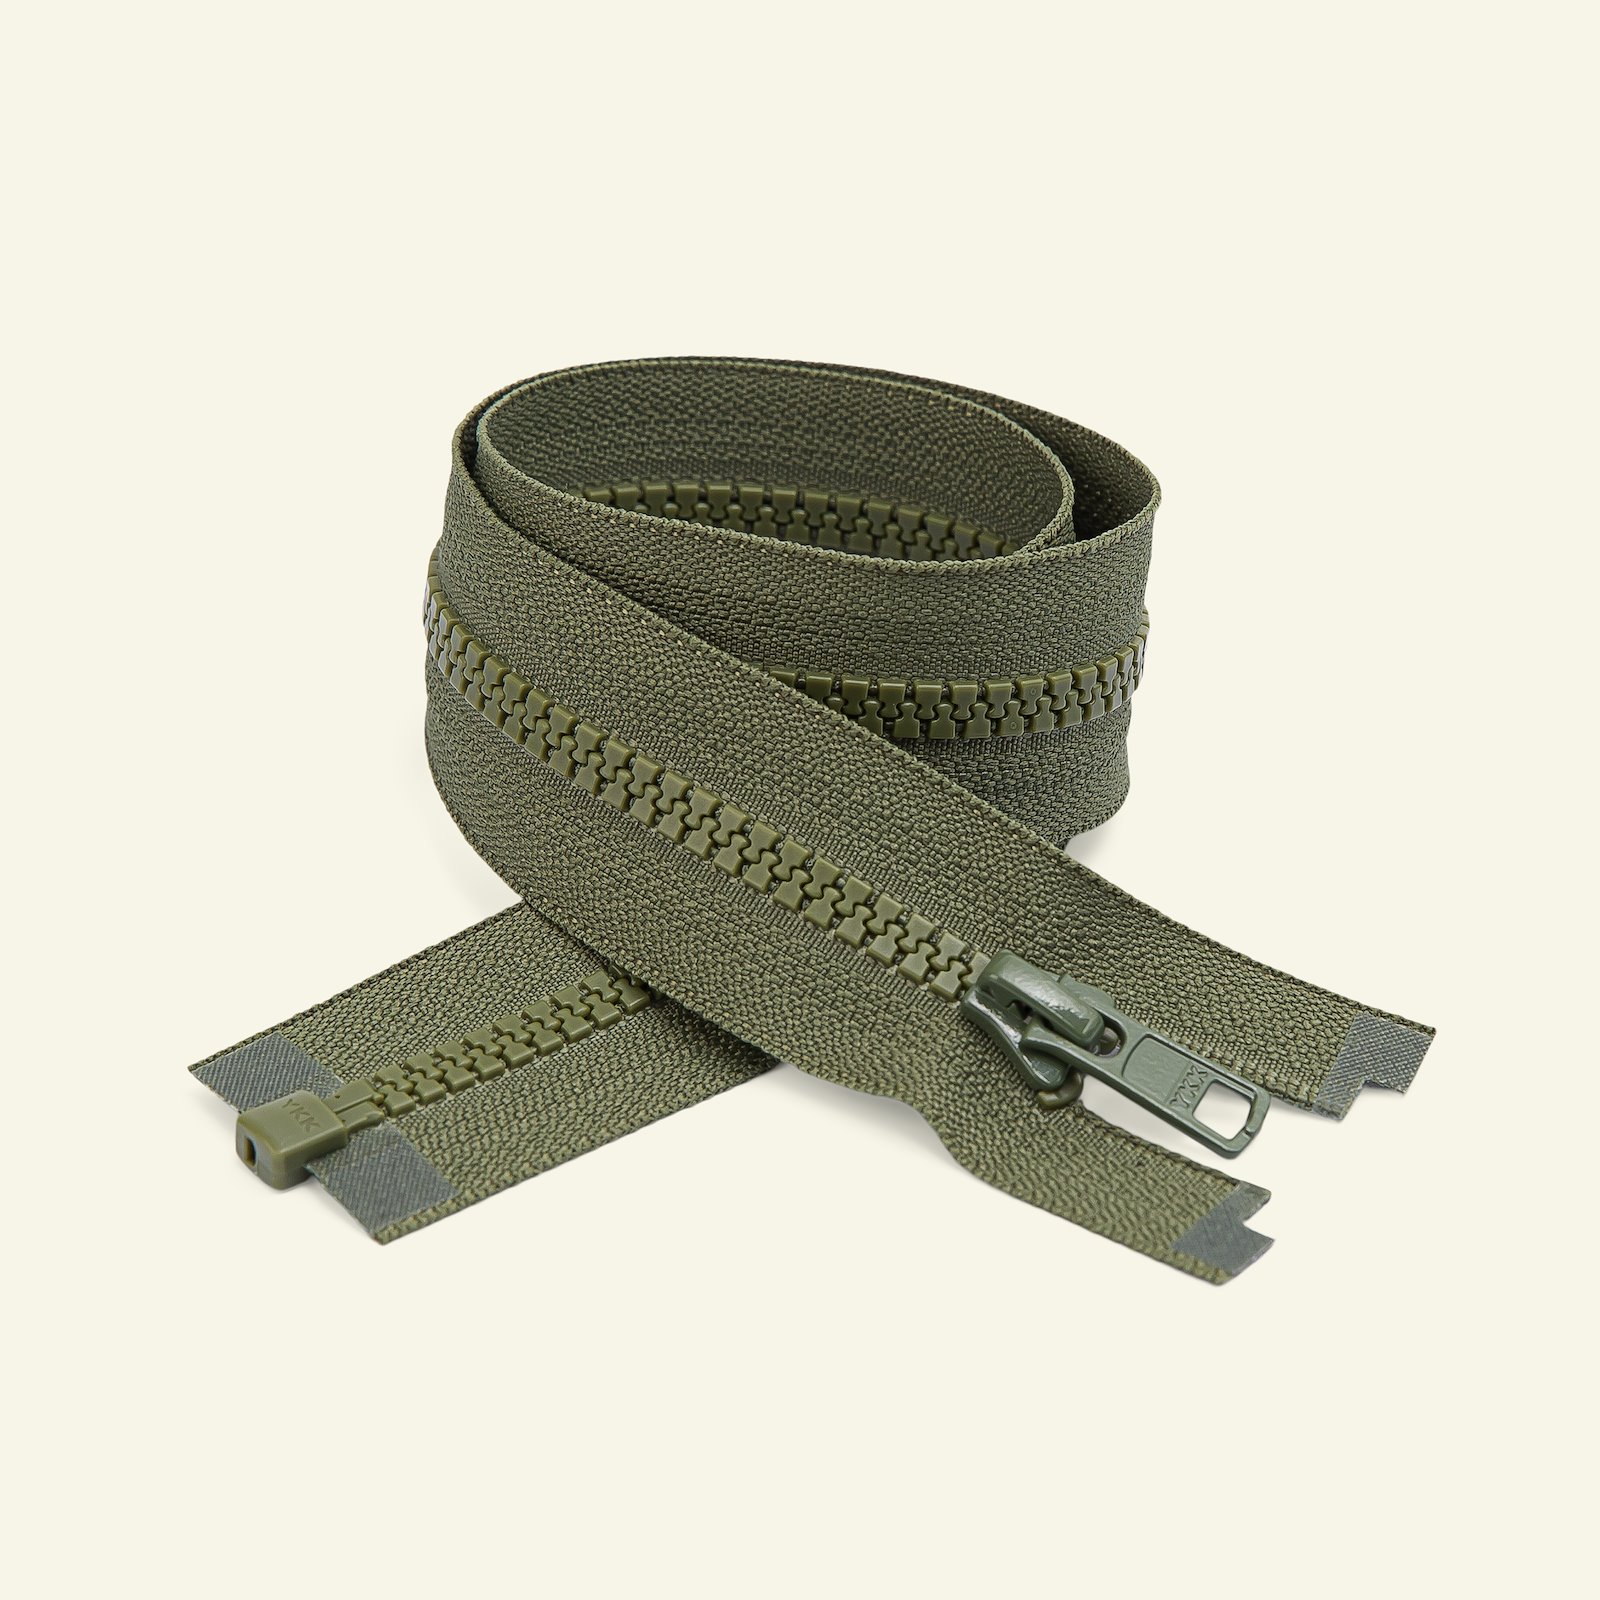 YKK zip 6mm open end 70cm army x50033_pack